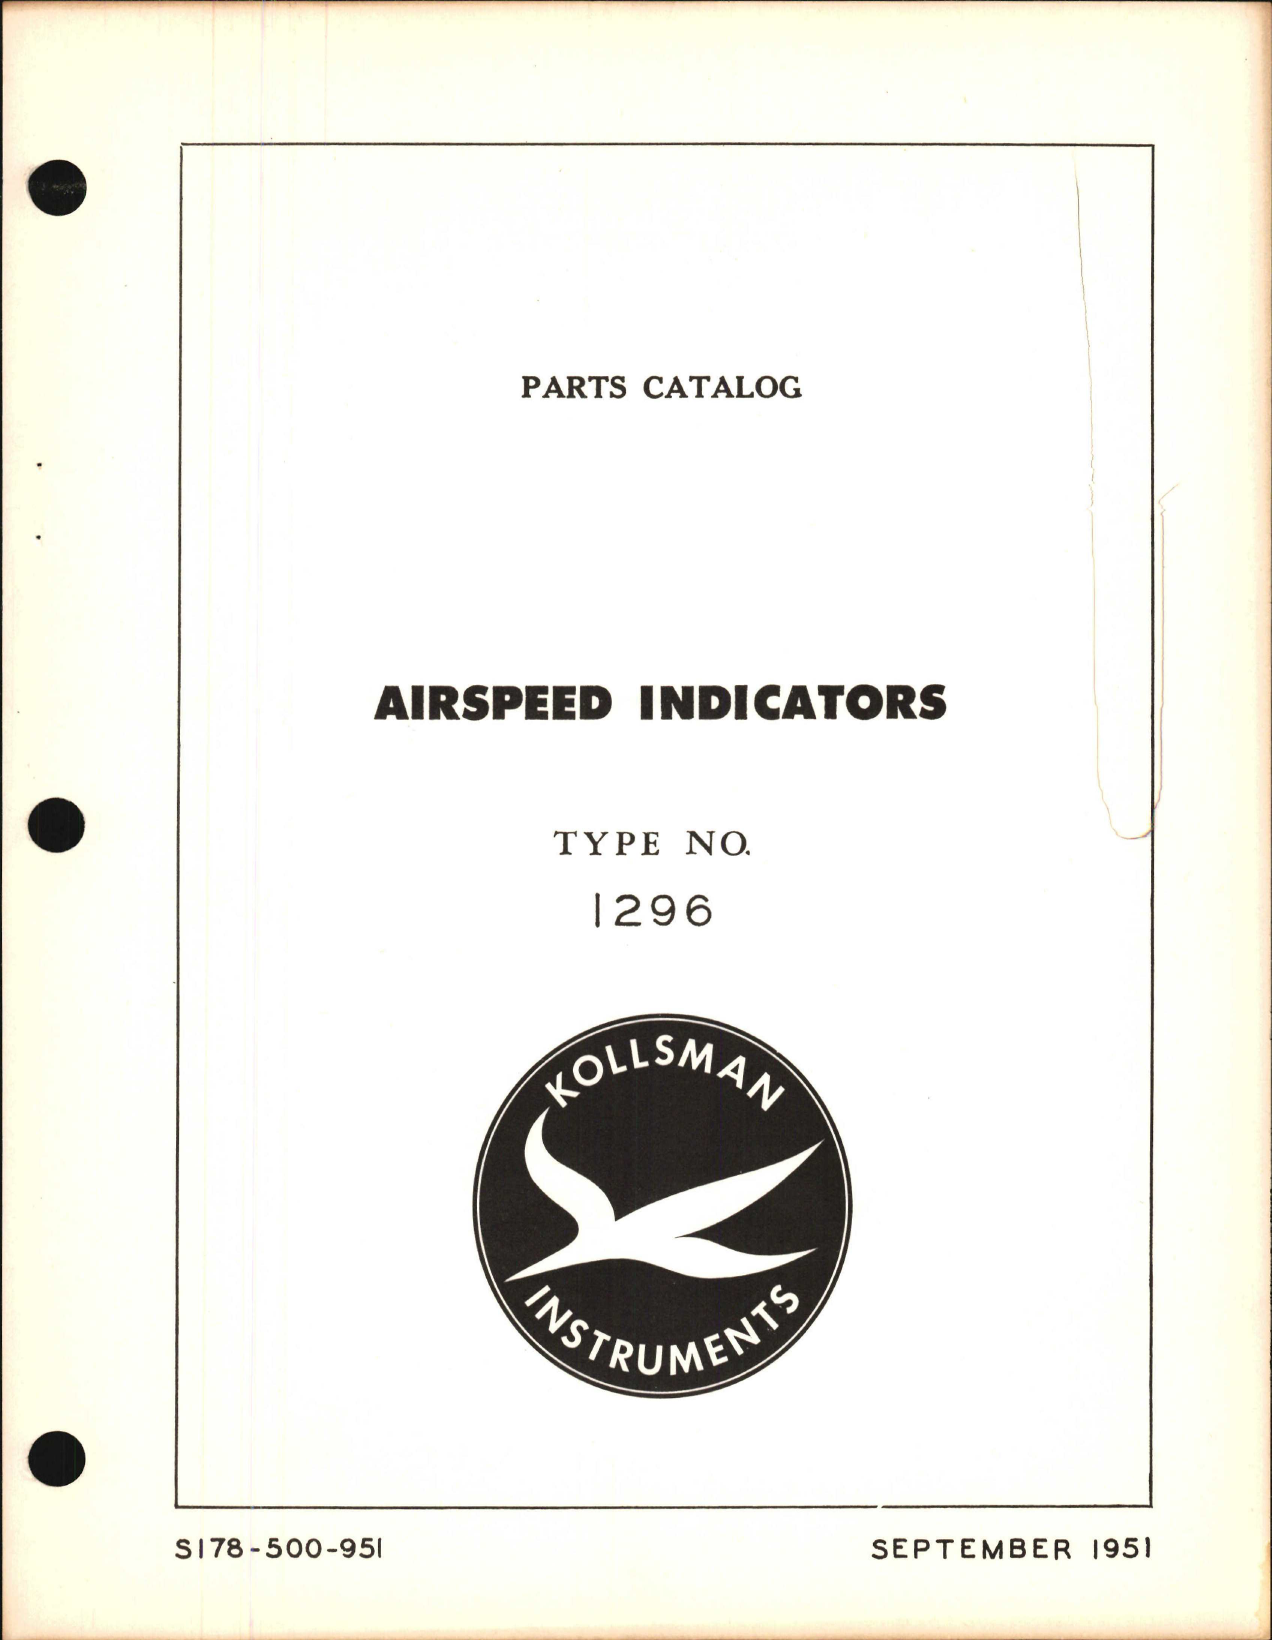 Sample page 1 from AirCorps Library document: Parts Catalog for Kollsman Airspeed Indicators Type No. 1296